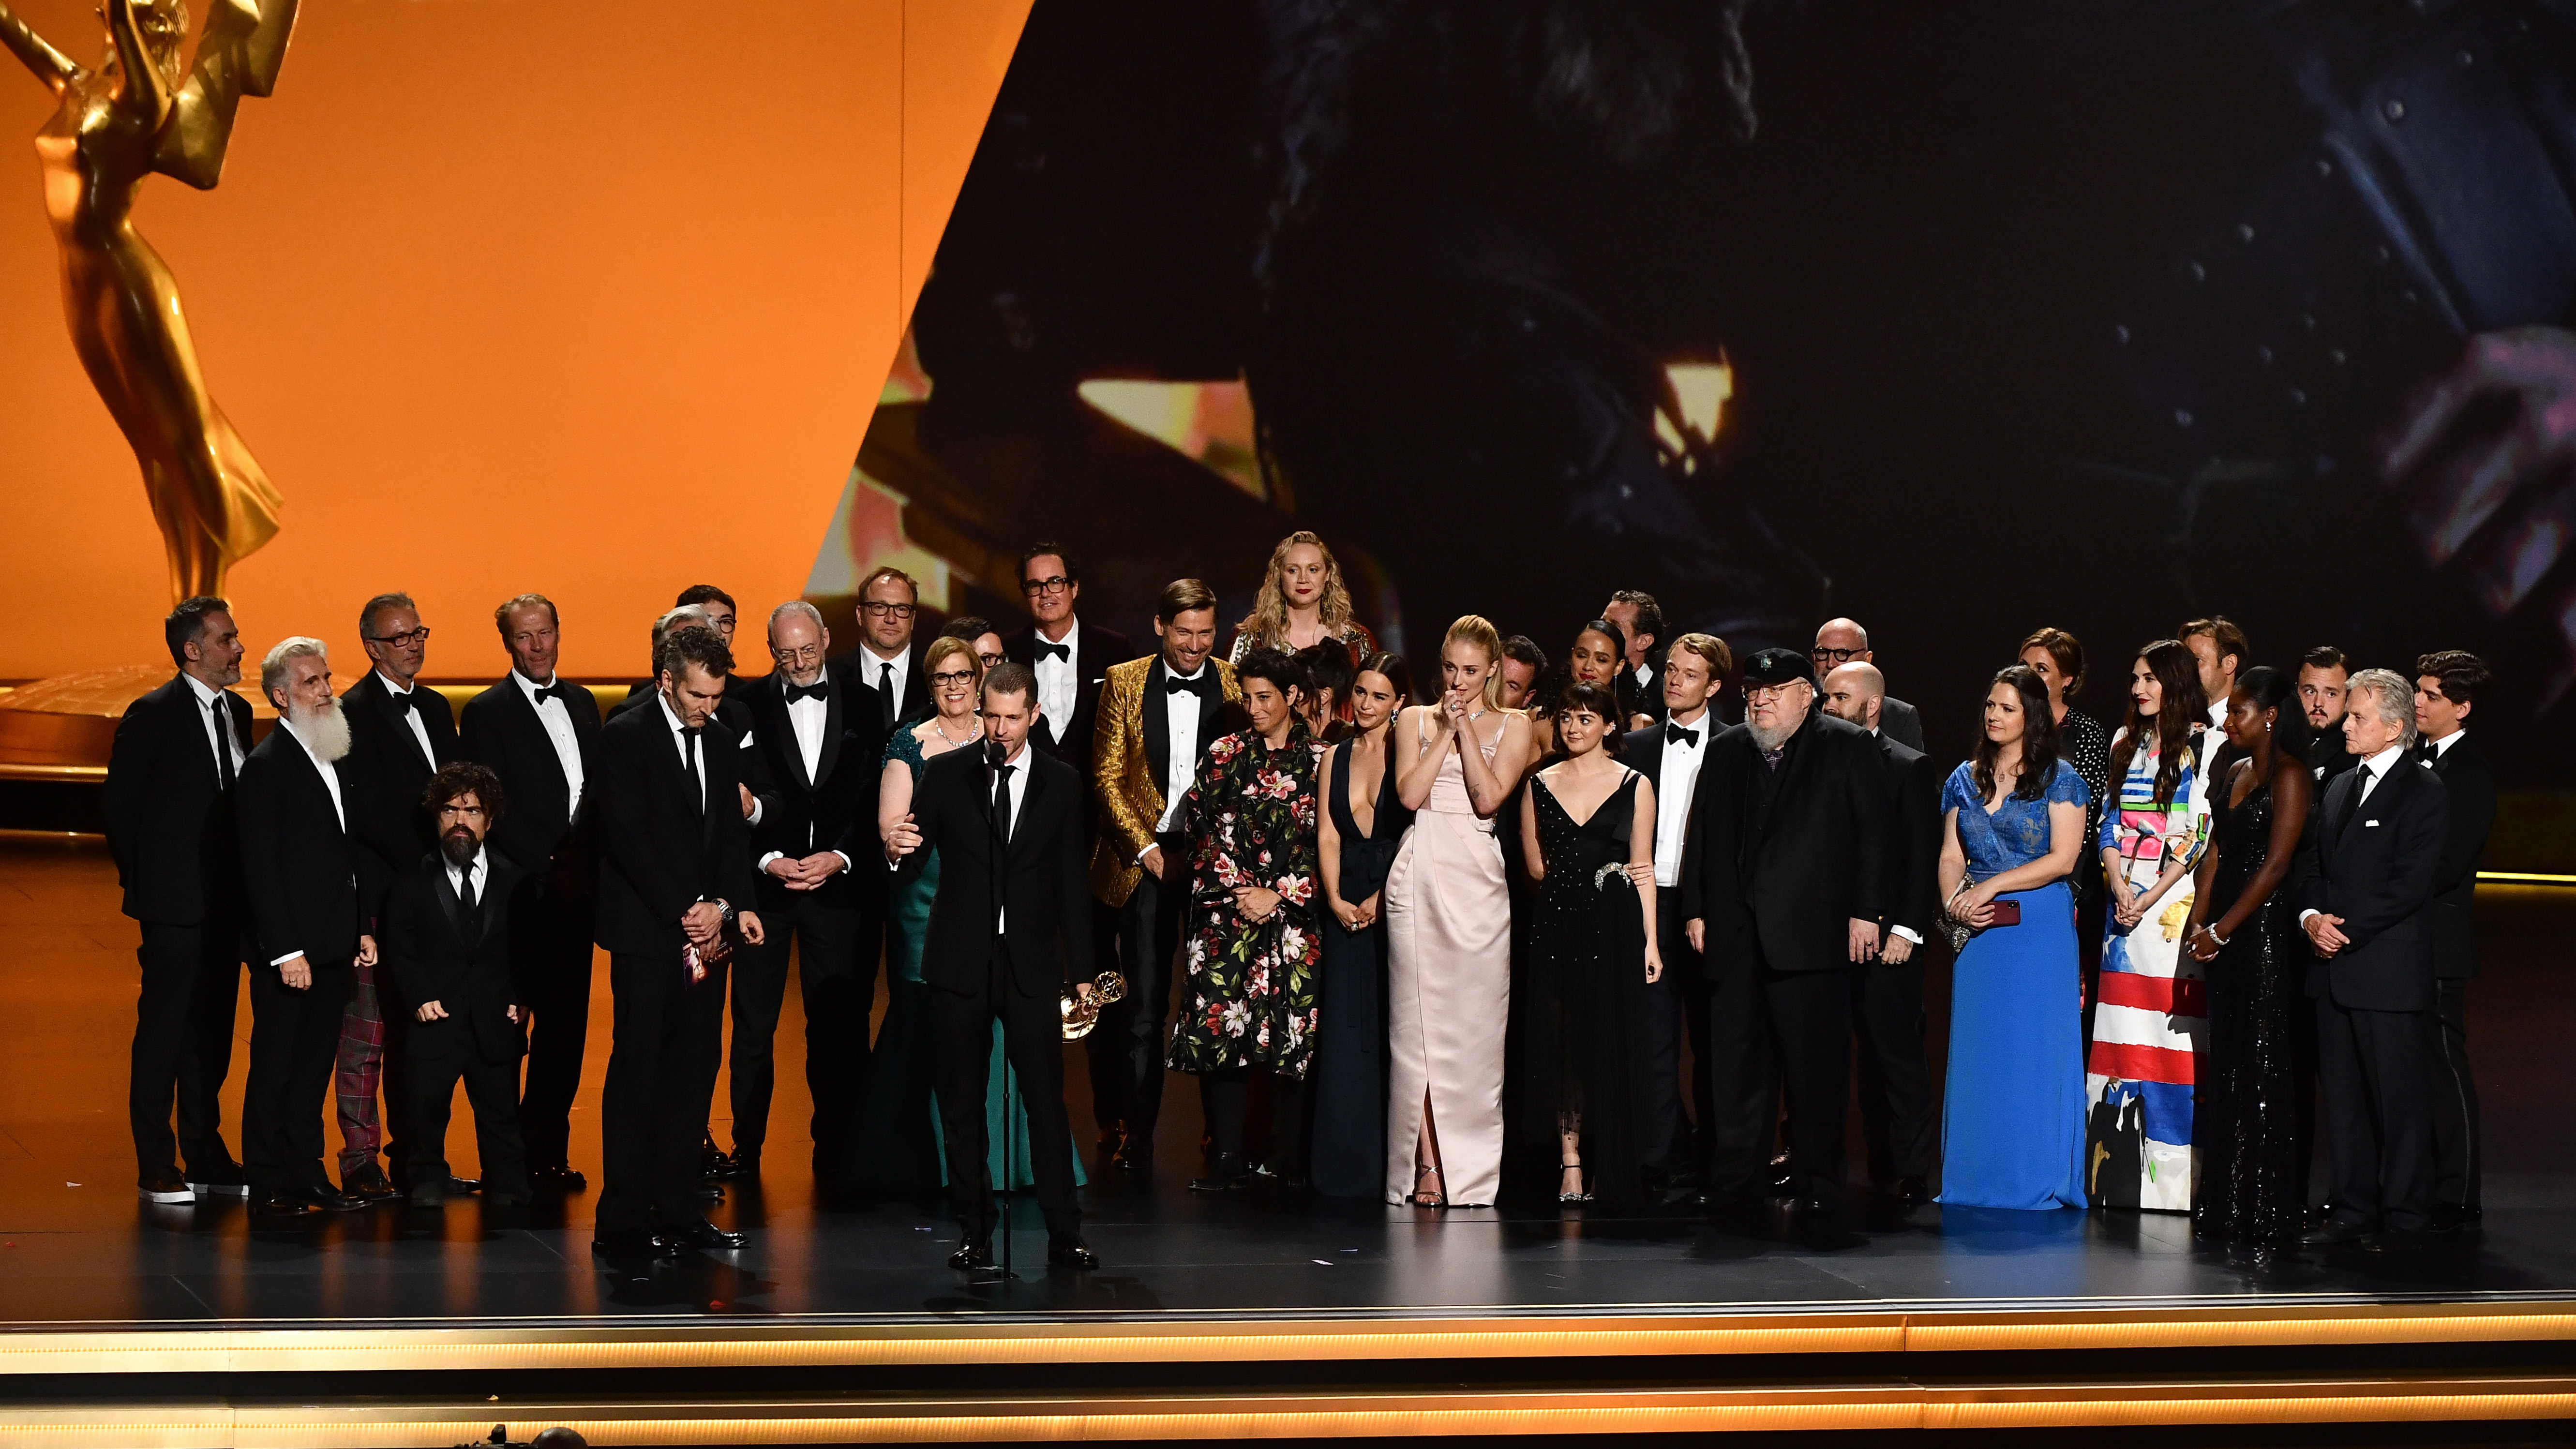 Оскар х. The Emmys TV Award. Oscars 2023 most watched Awards show in three years.